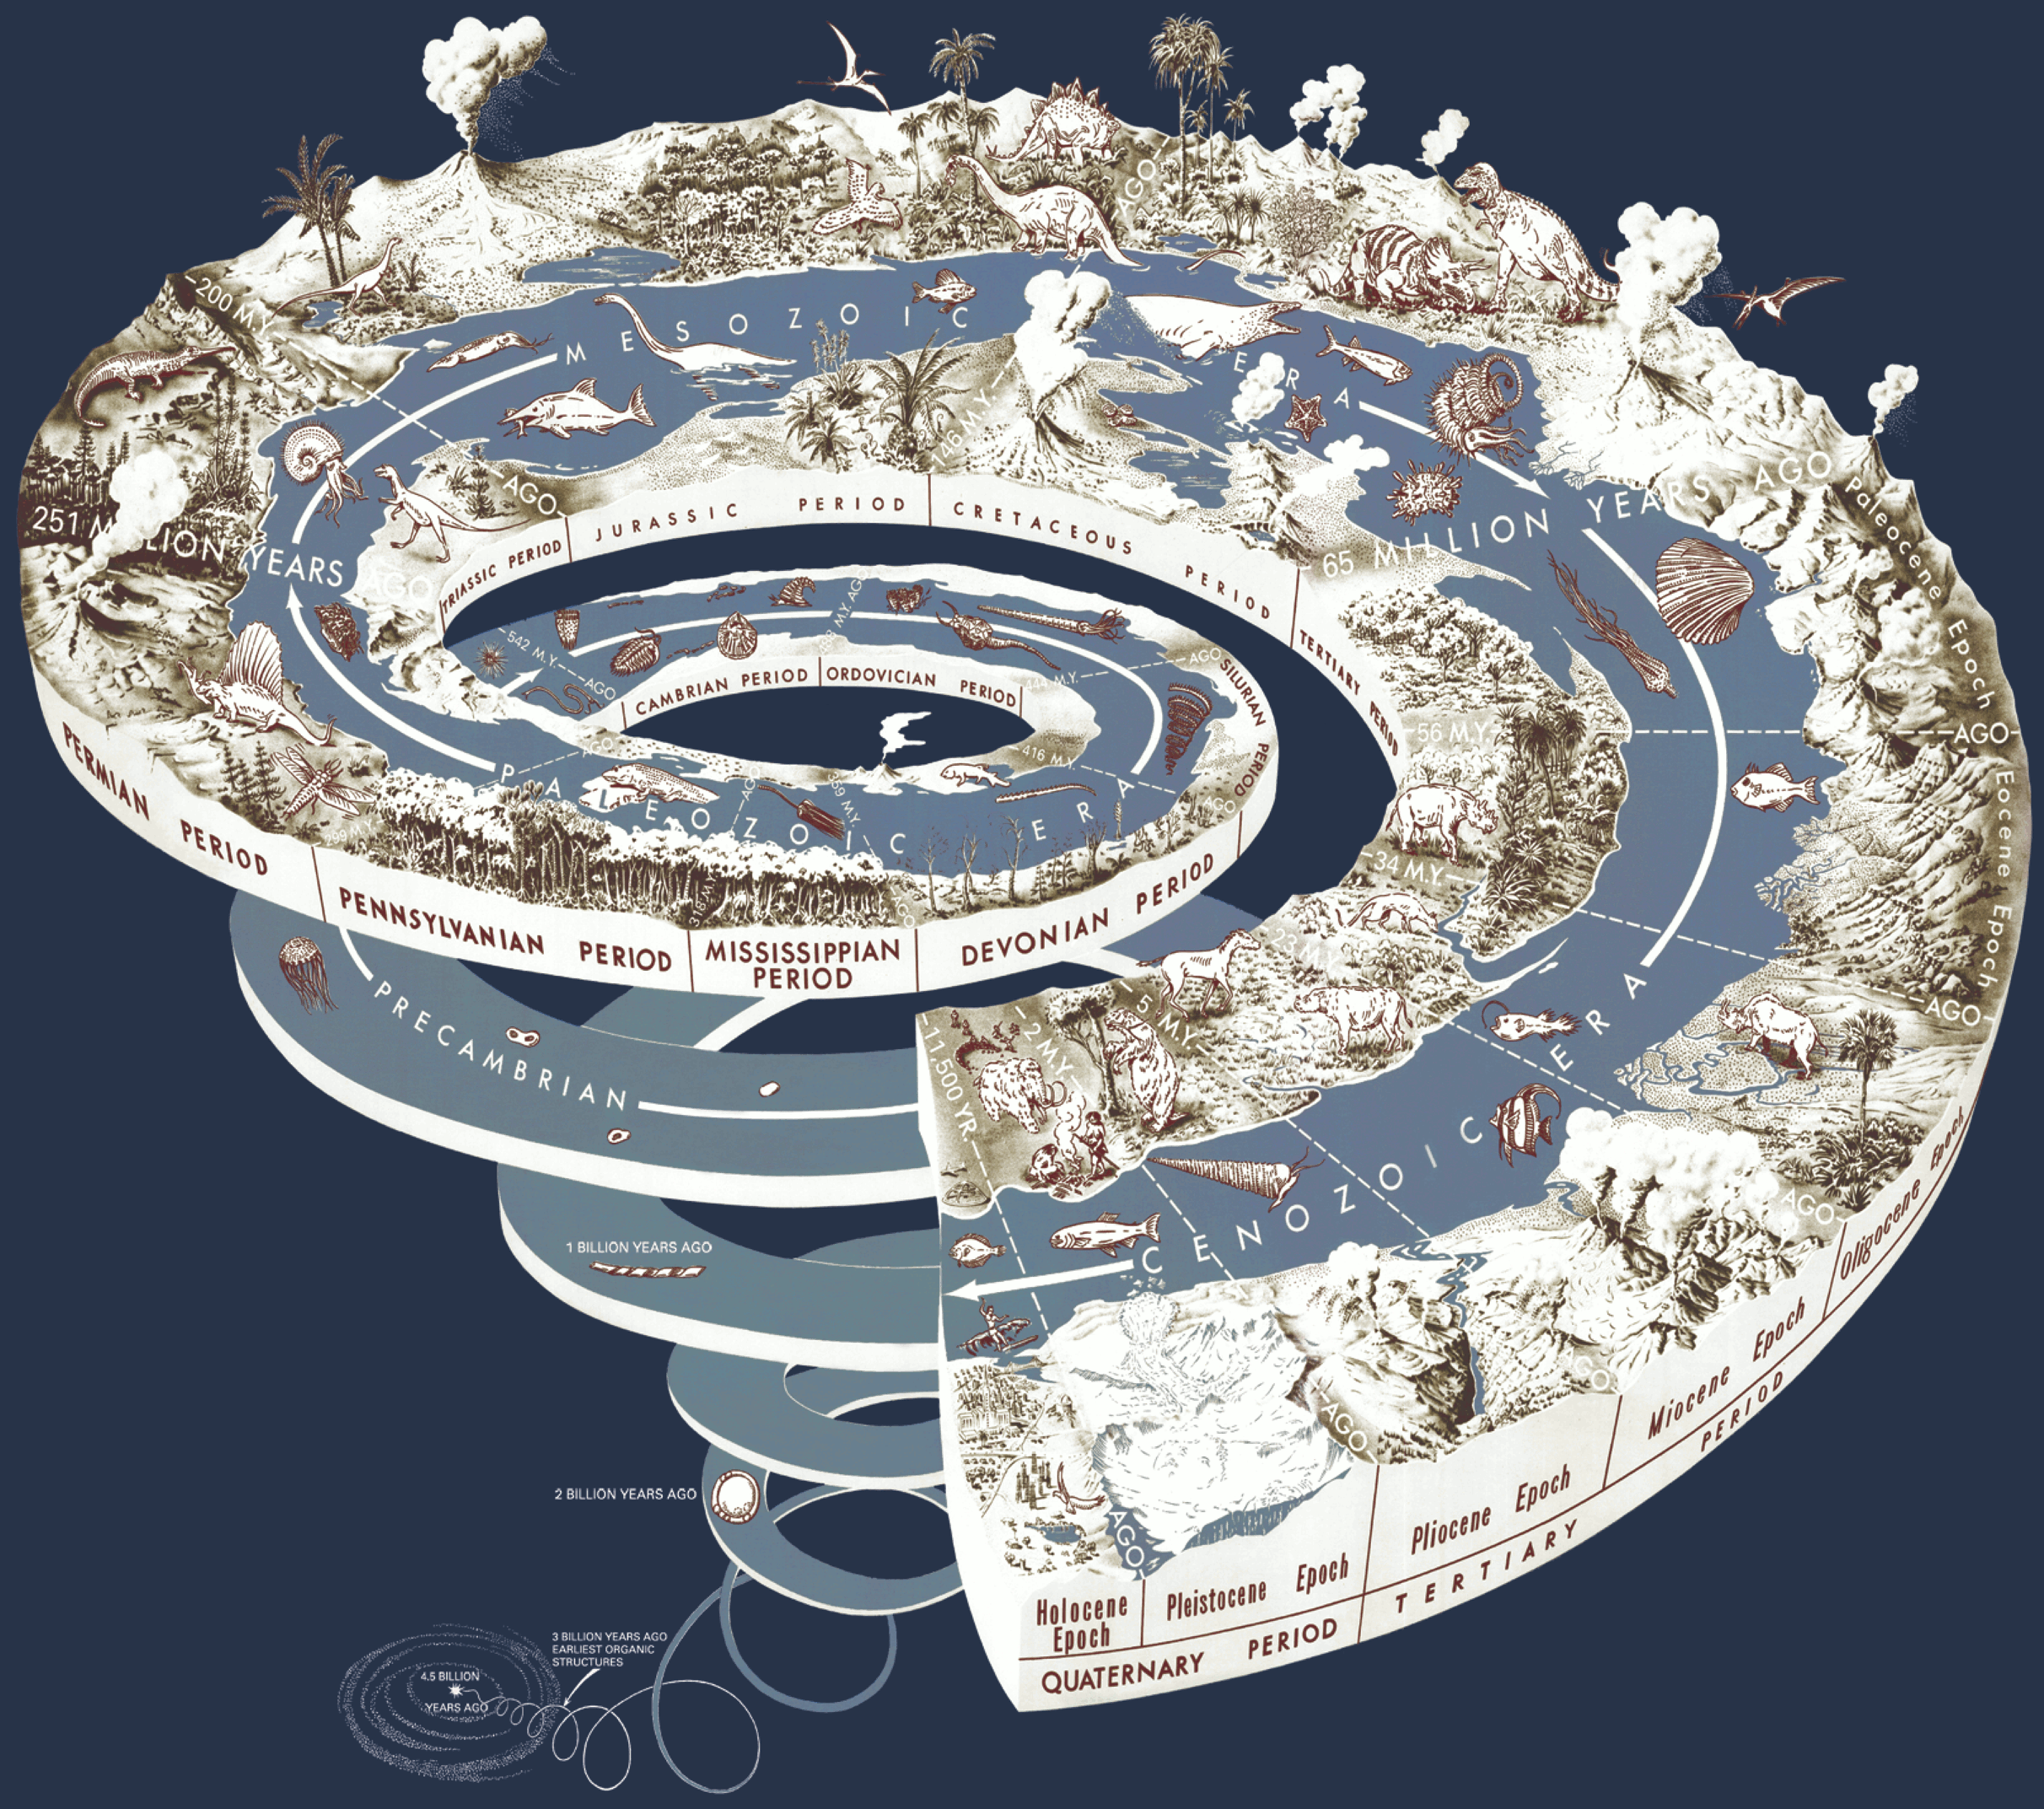 A spiral representing Earth's history with various species representing the progression of evolution.